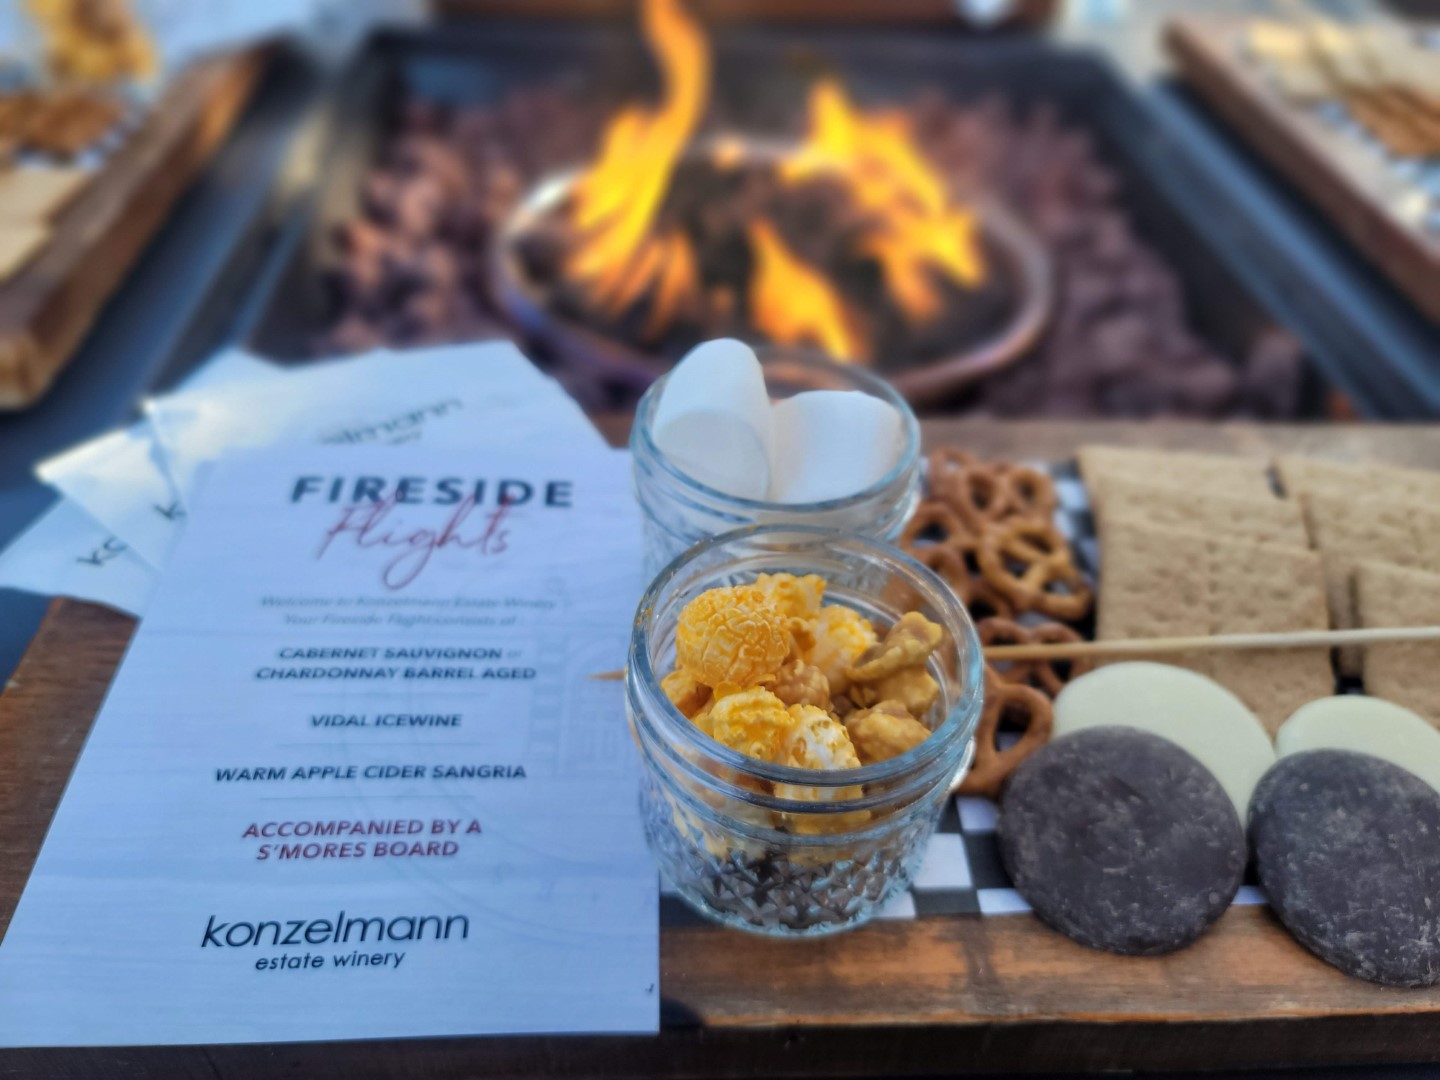 wine tasting flight with popcorn and smores next to fire pit